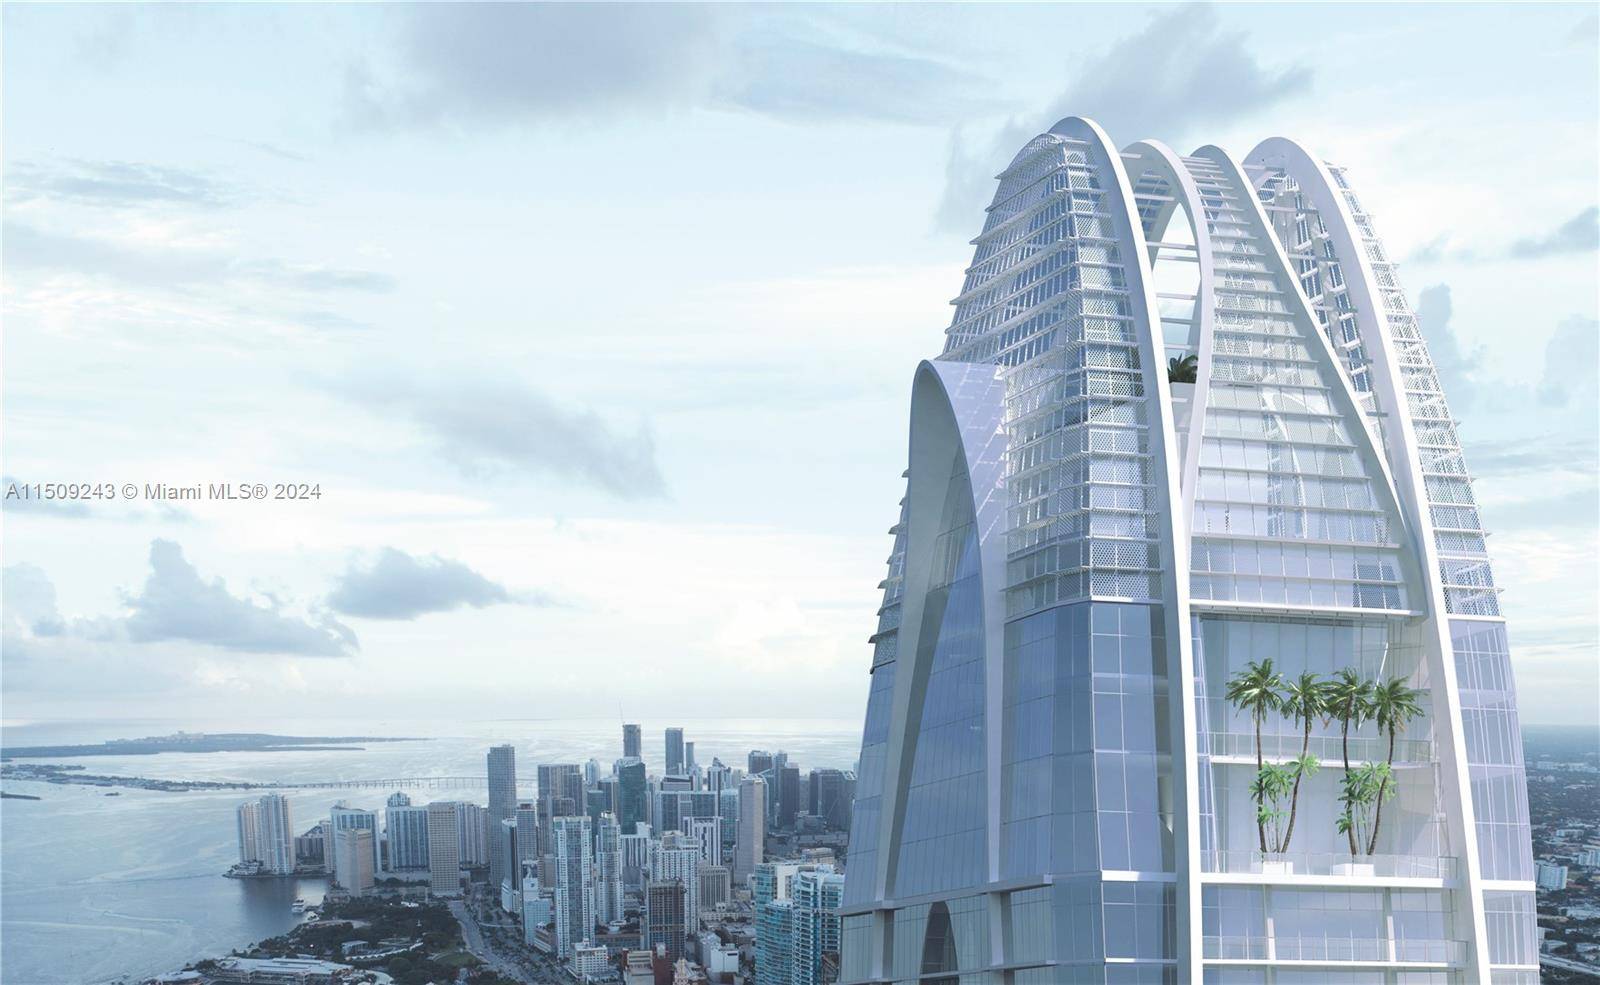 With a gently rippling glass façade that soars gracefully towards its curved apex, Okan Tower is a 70 story work of art.